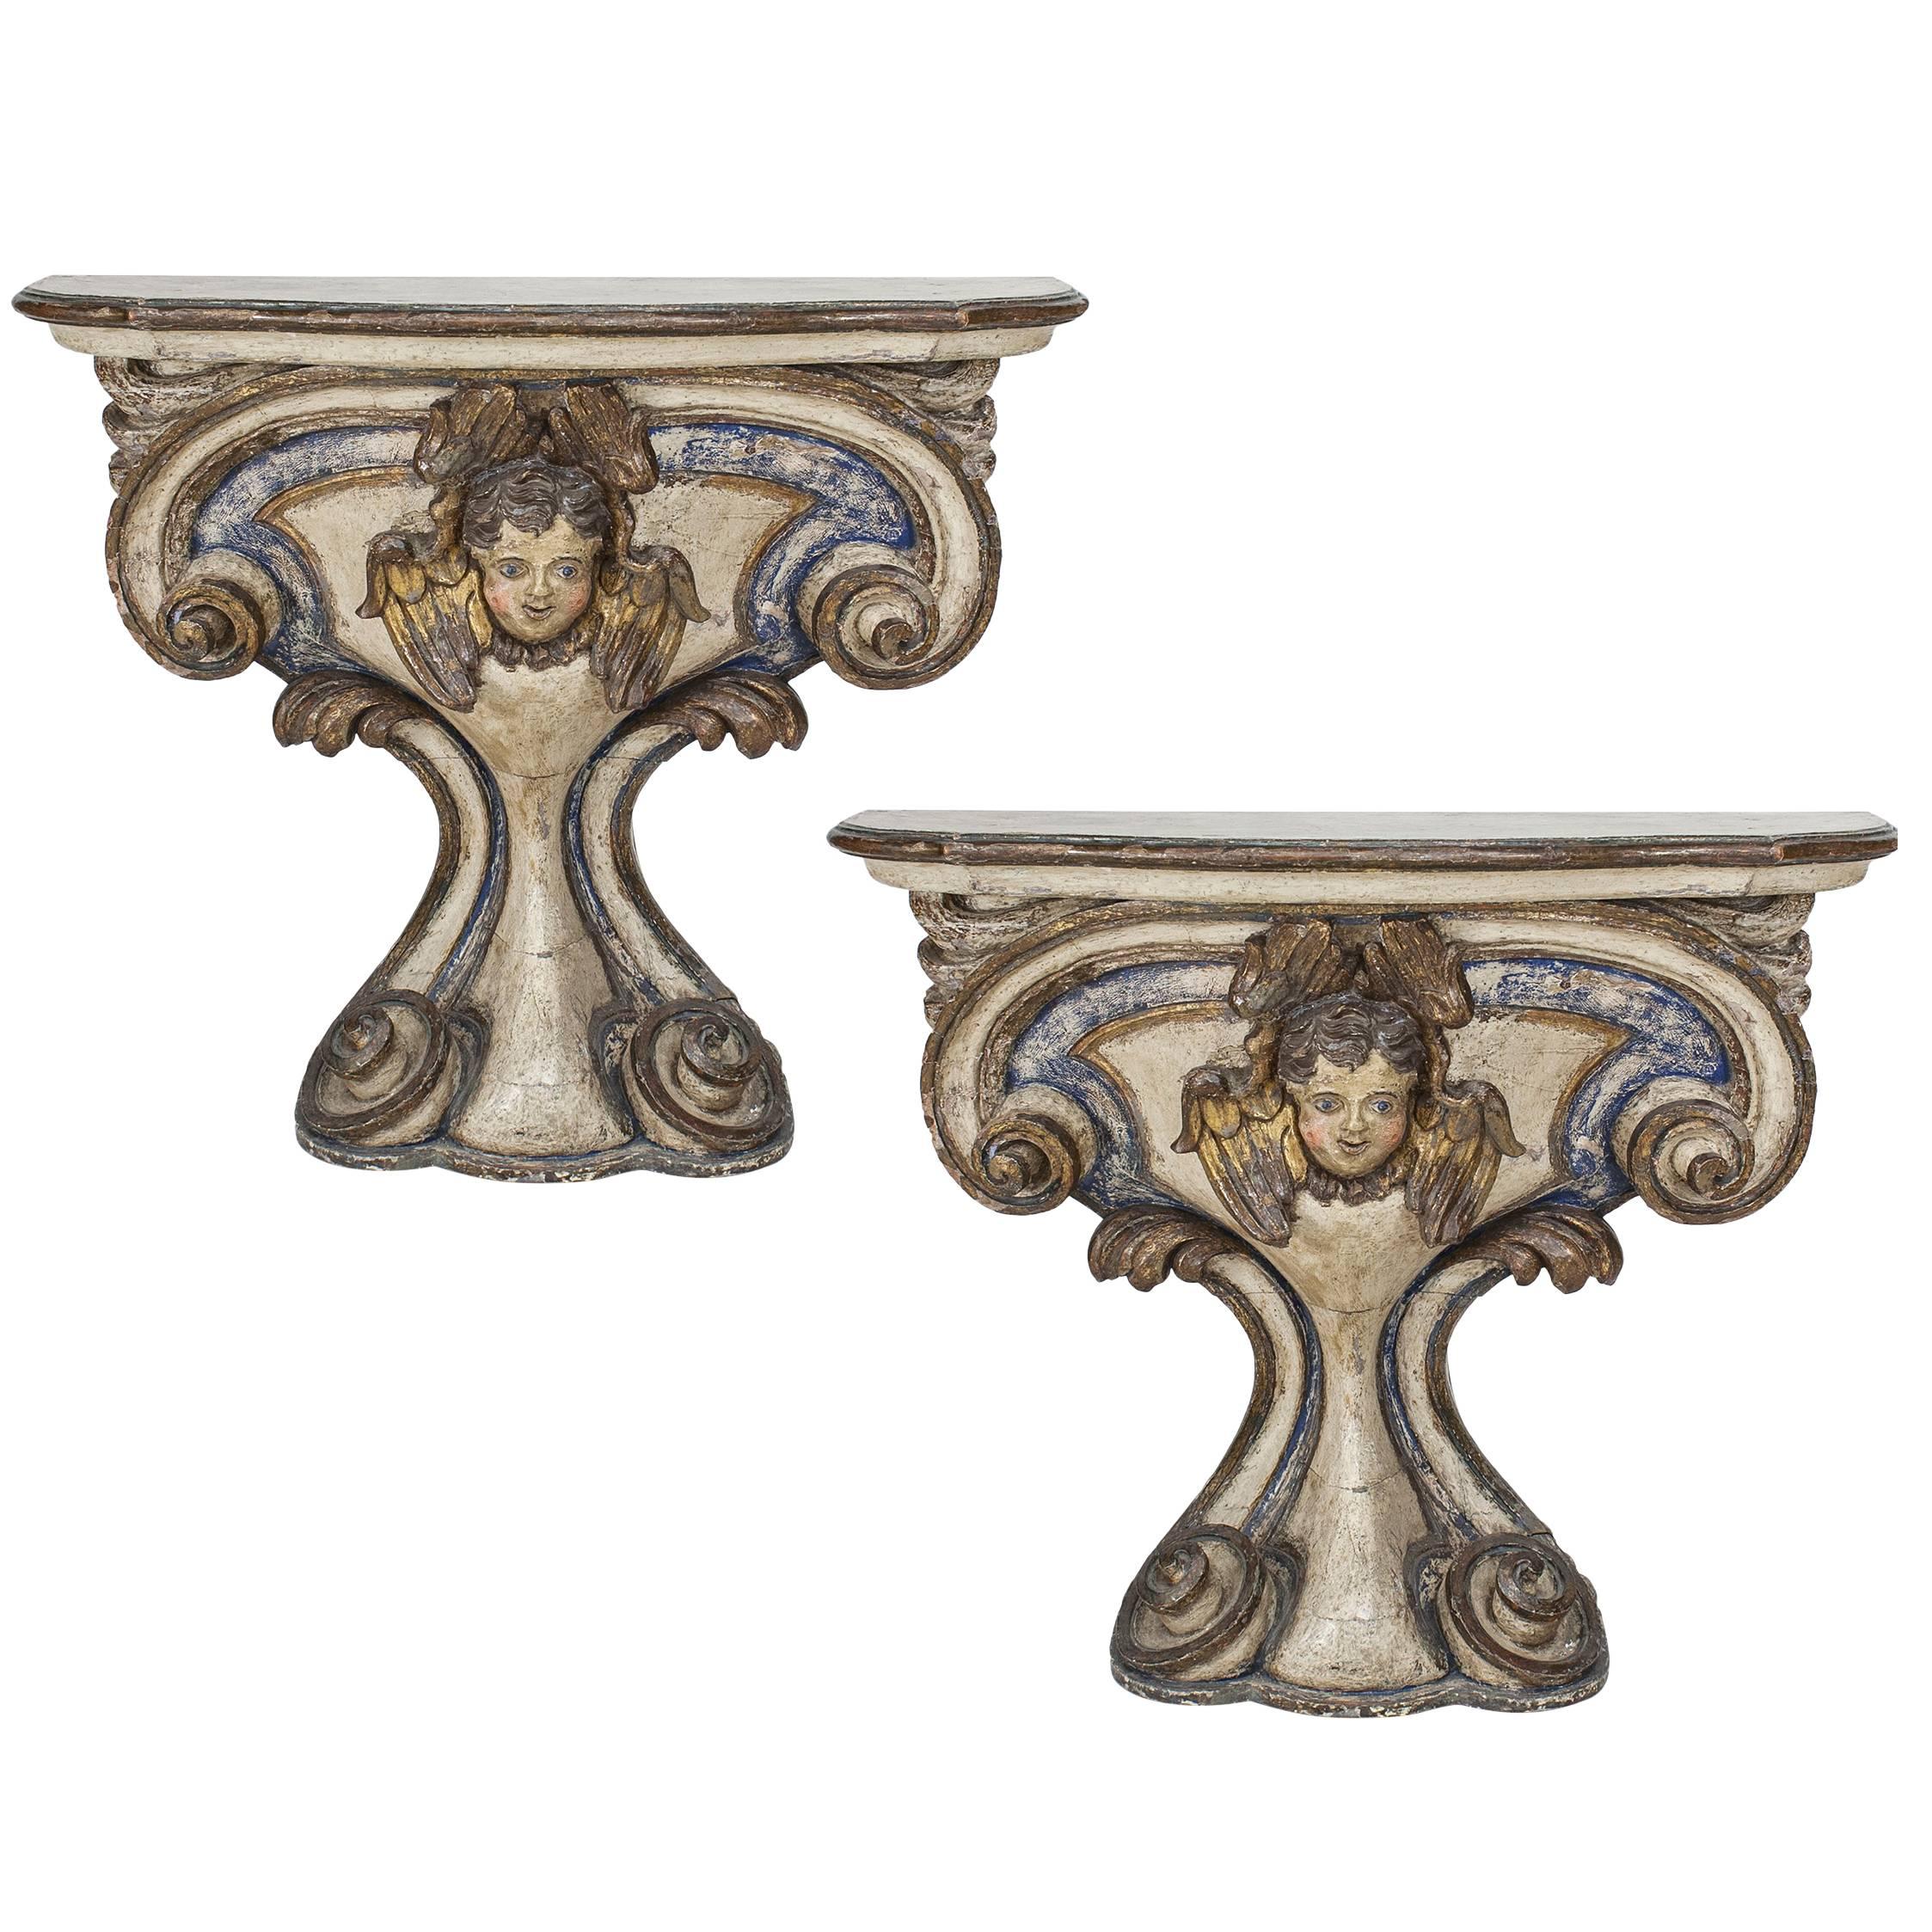 Pair of 18th Century Italian Polychrome and Gilt Limewood Consoles with Cherubs